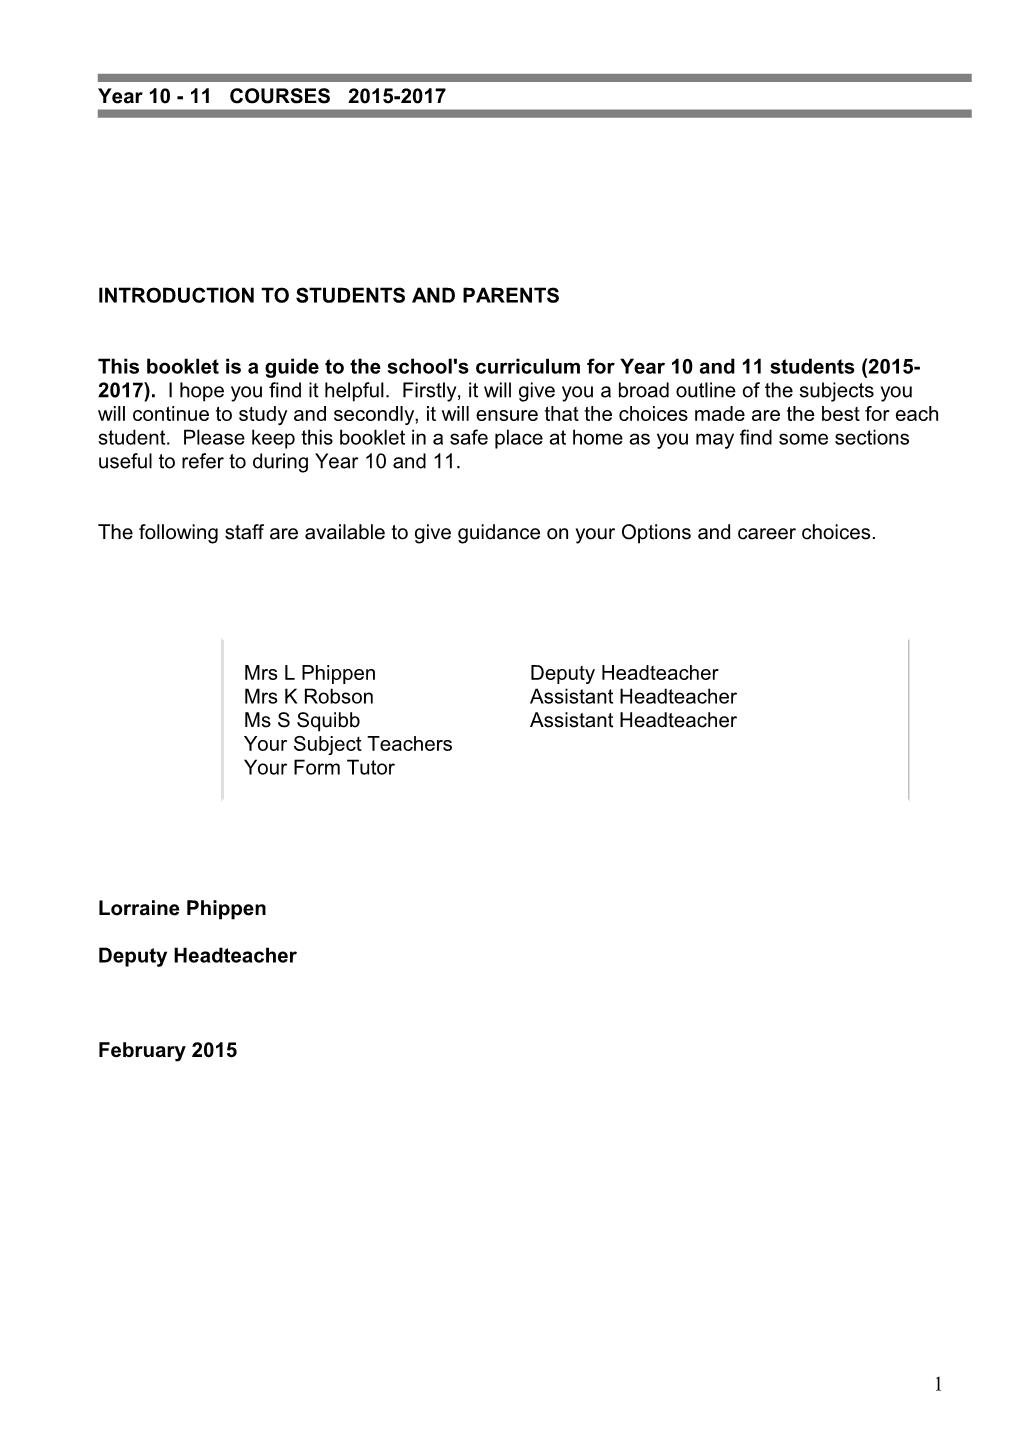 Introduction to Students and Parents